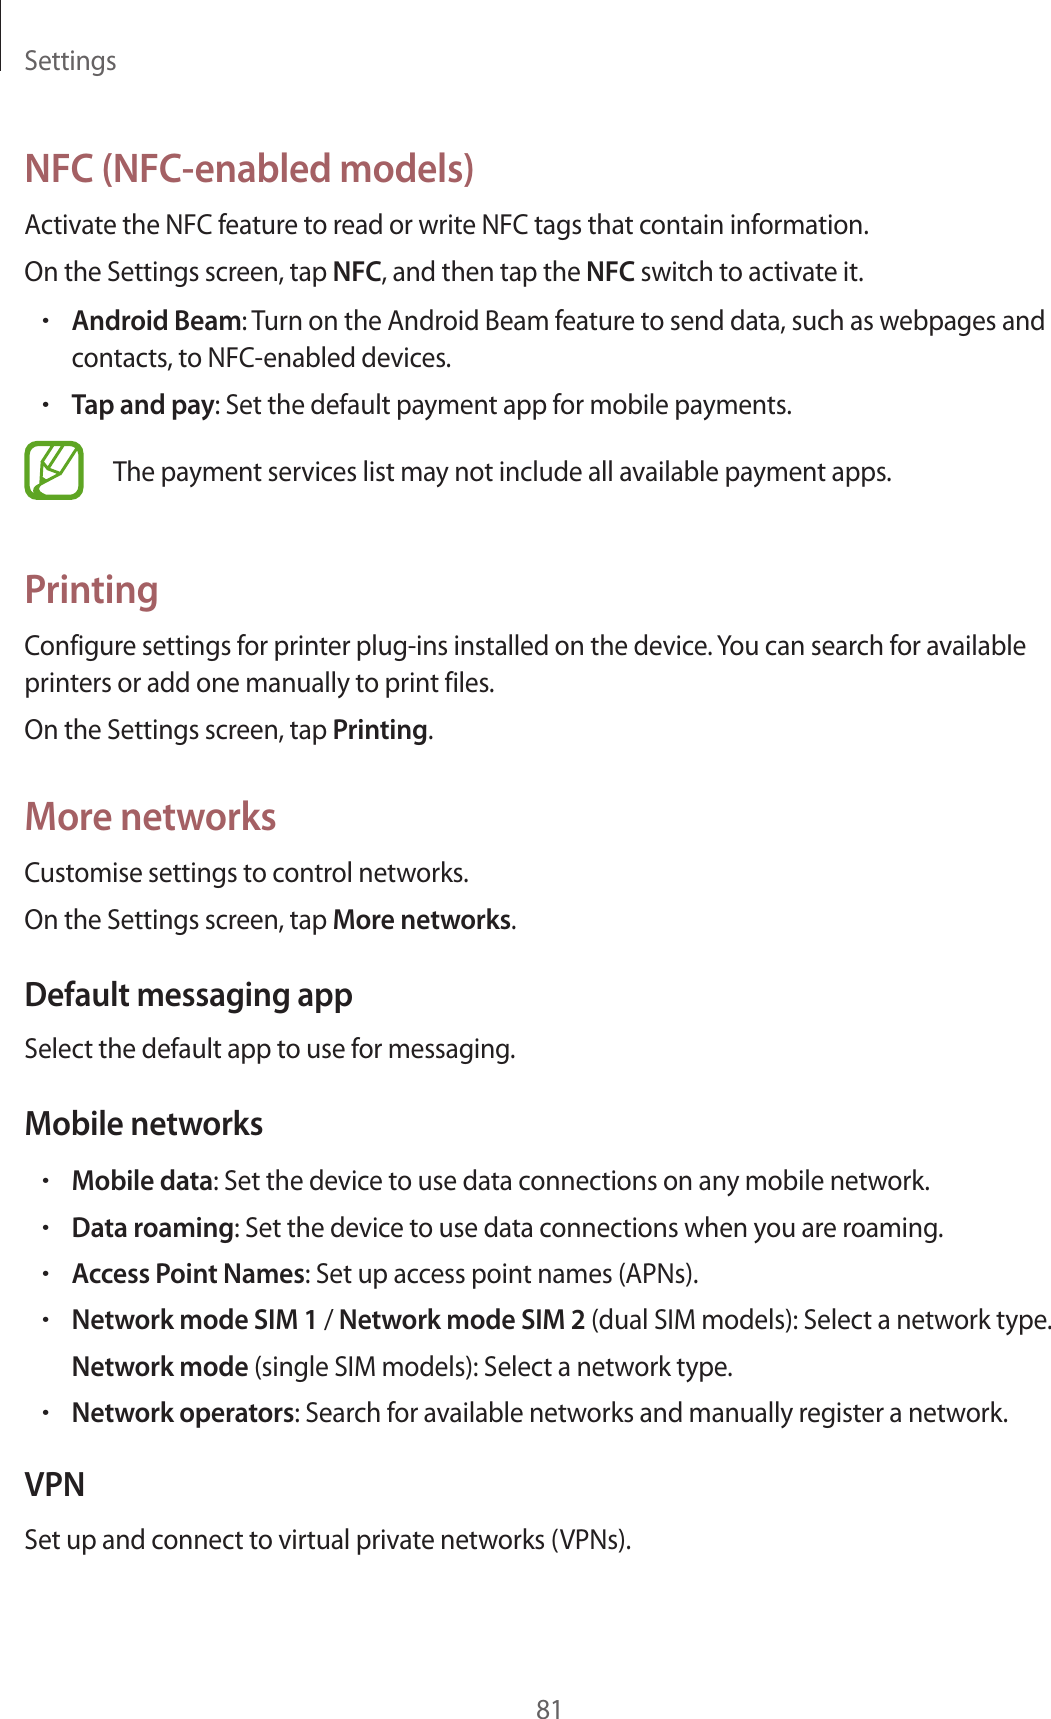 Settings81NFC (NFC-enabled models)Activate the NFC feature to read or write NFC tags that contain information.On the Settings screen, tap NFC, and then tap the NFC switch to activate it.•Android Beam: Turn on the Android Beam feature to send data, such as webpages and contacts, to NFC-enabled devices.•Tap and pay: Set the default payment app for mobile payments.The payment services list may not include all available payment apps.PrintingConfigure settings for printer plug-ins installed on the device. You can search for available printers or add one manually to print files.On the Settings screen, tap Printing.More networksCustomise settings to control networks.On the Settings screen, tap More networks.Default messaging appSelect the default app to use for messaging.Mobile networks•Mobile data: Set the device to use data connections on any mobile network.•Data roaming: Set the device to use data connections when you are roaming.•Access Point Names: Set up access point names (APNs).•Network mode SIM 1 / Network mode SIM 2 (dual SIM models): Select a network type.Network mode (single SIM models): Select a network type.•Network operators: Search for available networks and manually register a network.VPNSet up and connect to virtual private networks (VPNs).